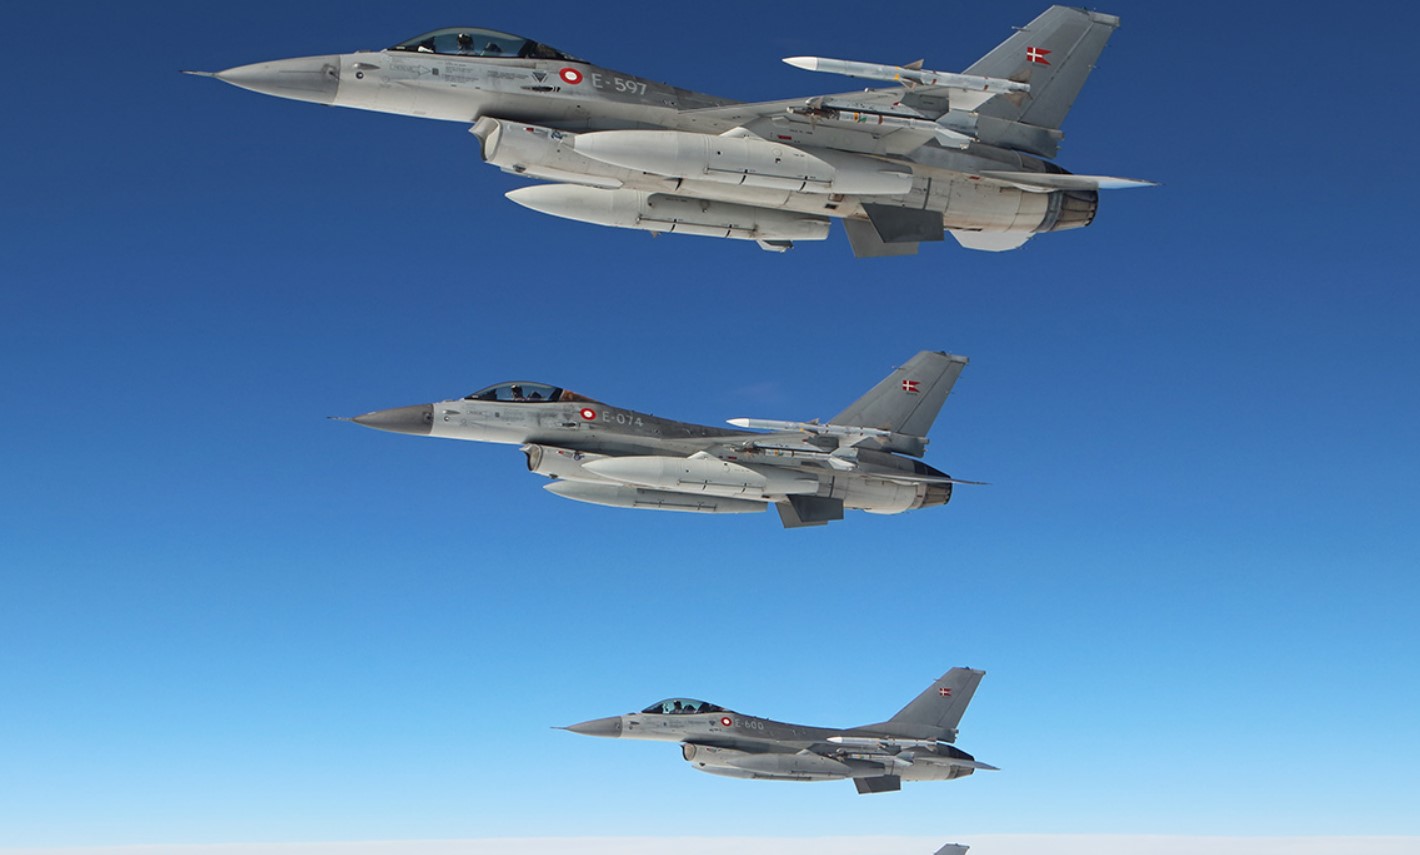 Argentina: Signing a letter of intent to purchase 24 used F-16 aircraft from Denmark